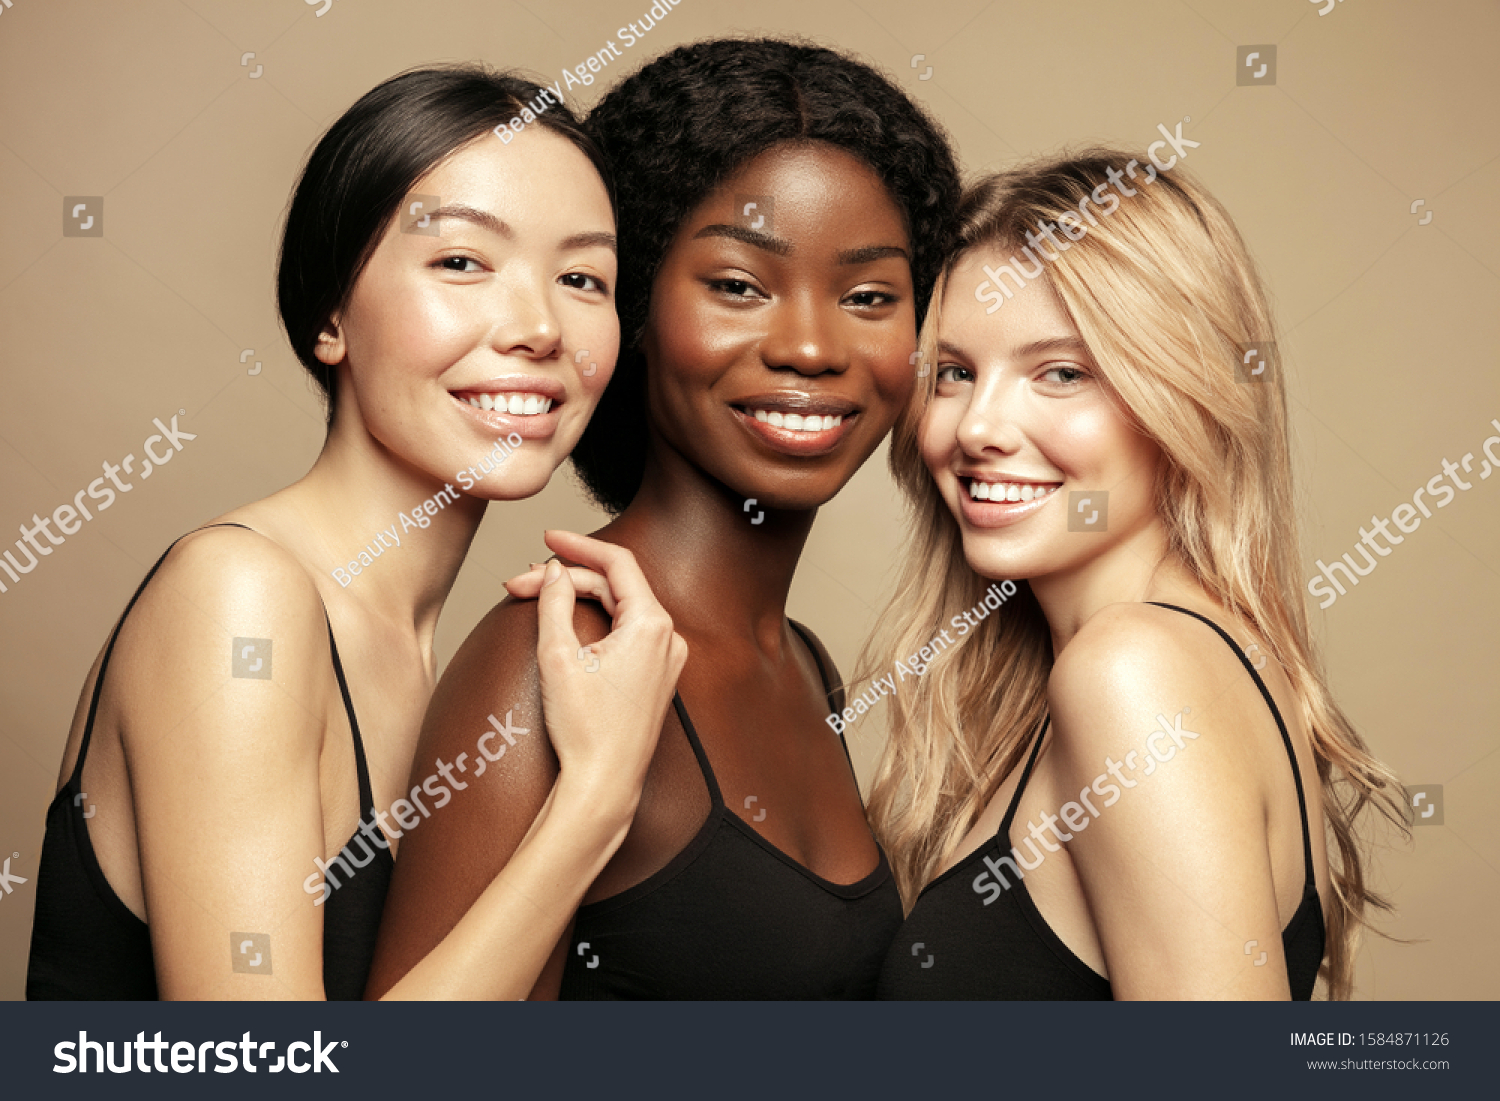 Beauty. Multi Ethnic Group of Womans with diffrent types of skin together and looking on camera. Diverse ethnicity women - Caucasian, African and Asian posing and smiling against beige background. #1584871126